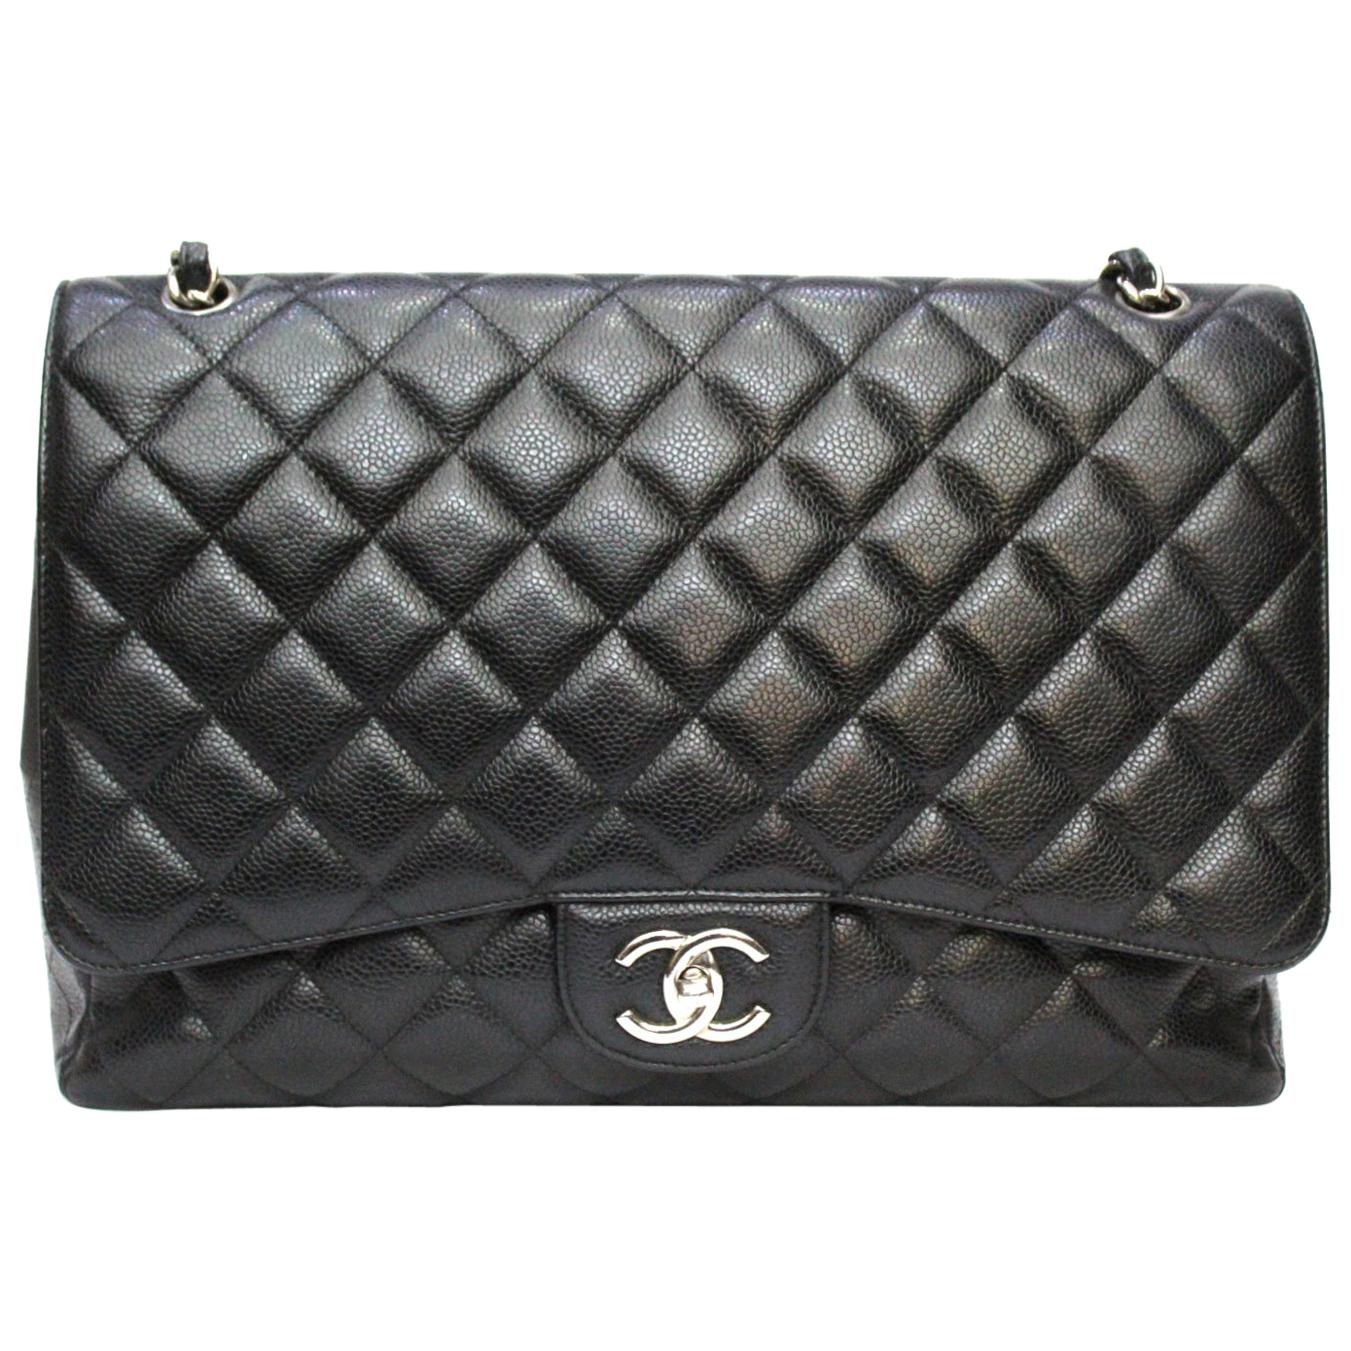 Vintage Chanel small double flap bag - THE HOUSE OF WAUW